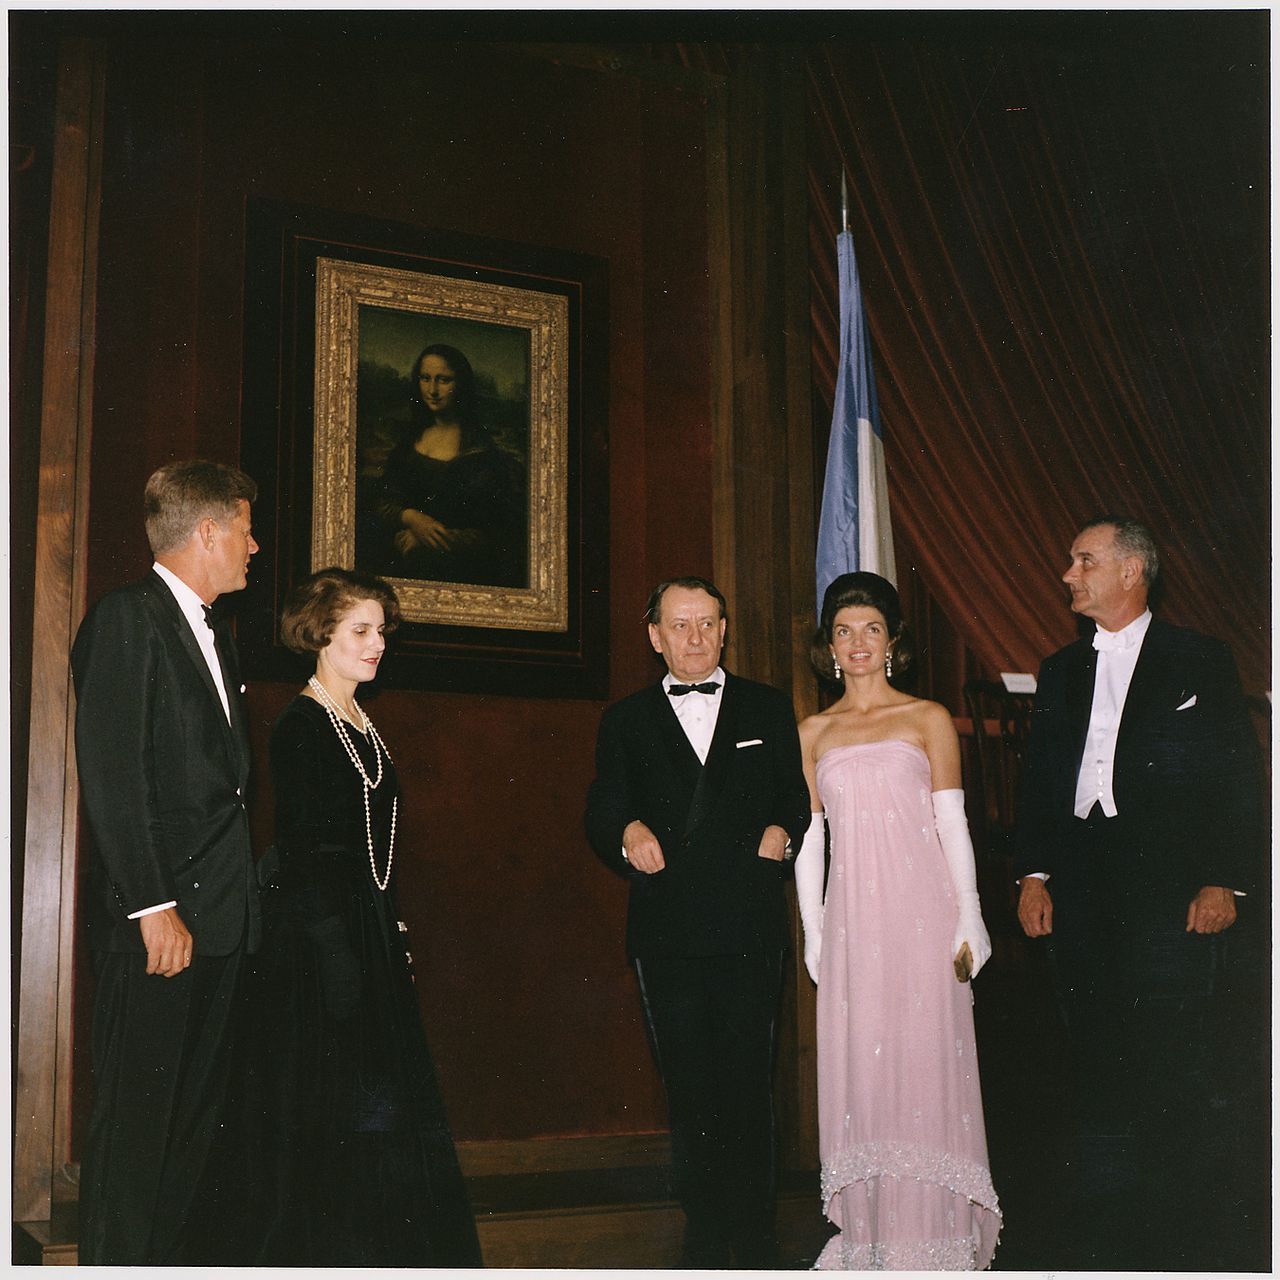 Unveiling of the Mona Lisa on January 8, 1963 at the National Gallery of Art. Left to right: U.S. President John F. Kennedy, Madeleine Malraux, André Malraux, U.S. First Lady Jacqueline Kennedy, and U.S. Vice President Lyndon B. Johnson.